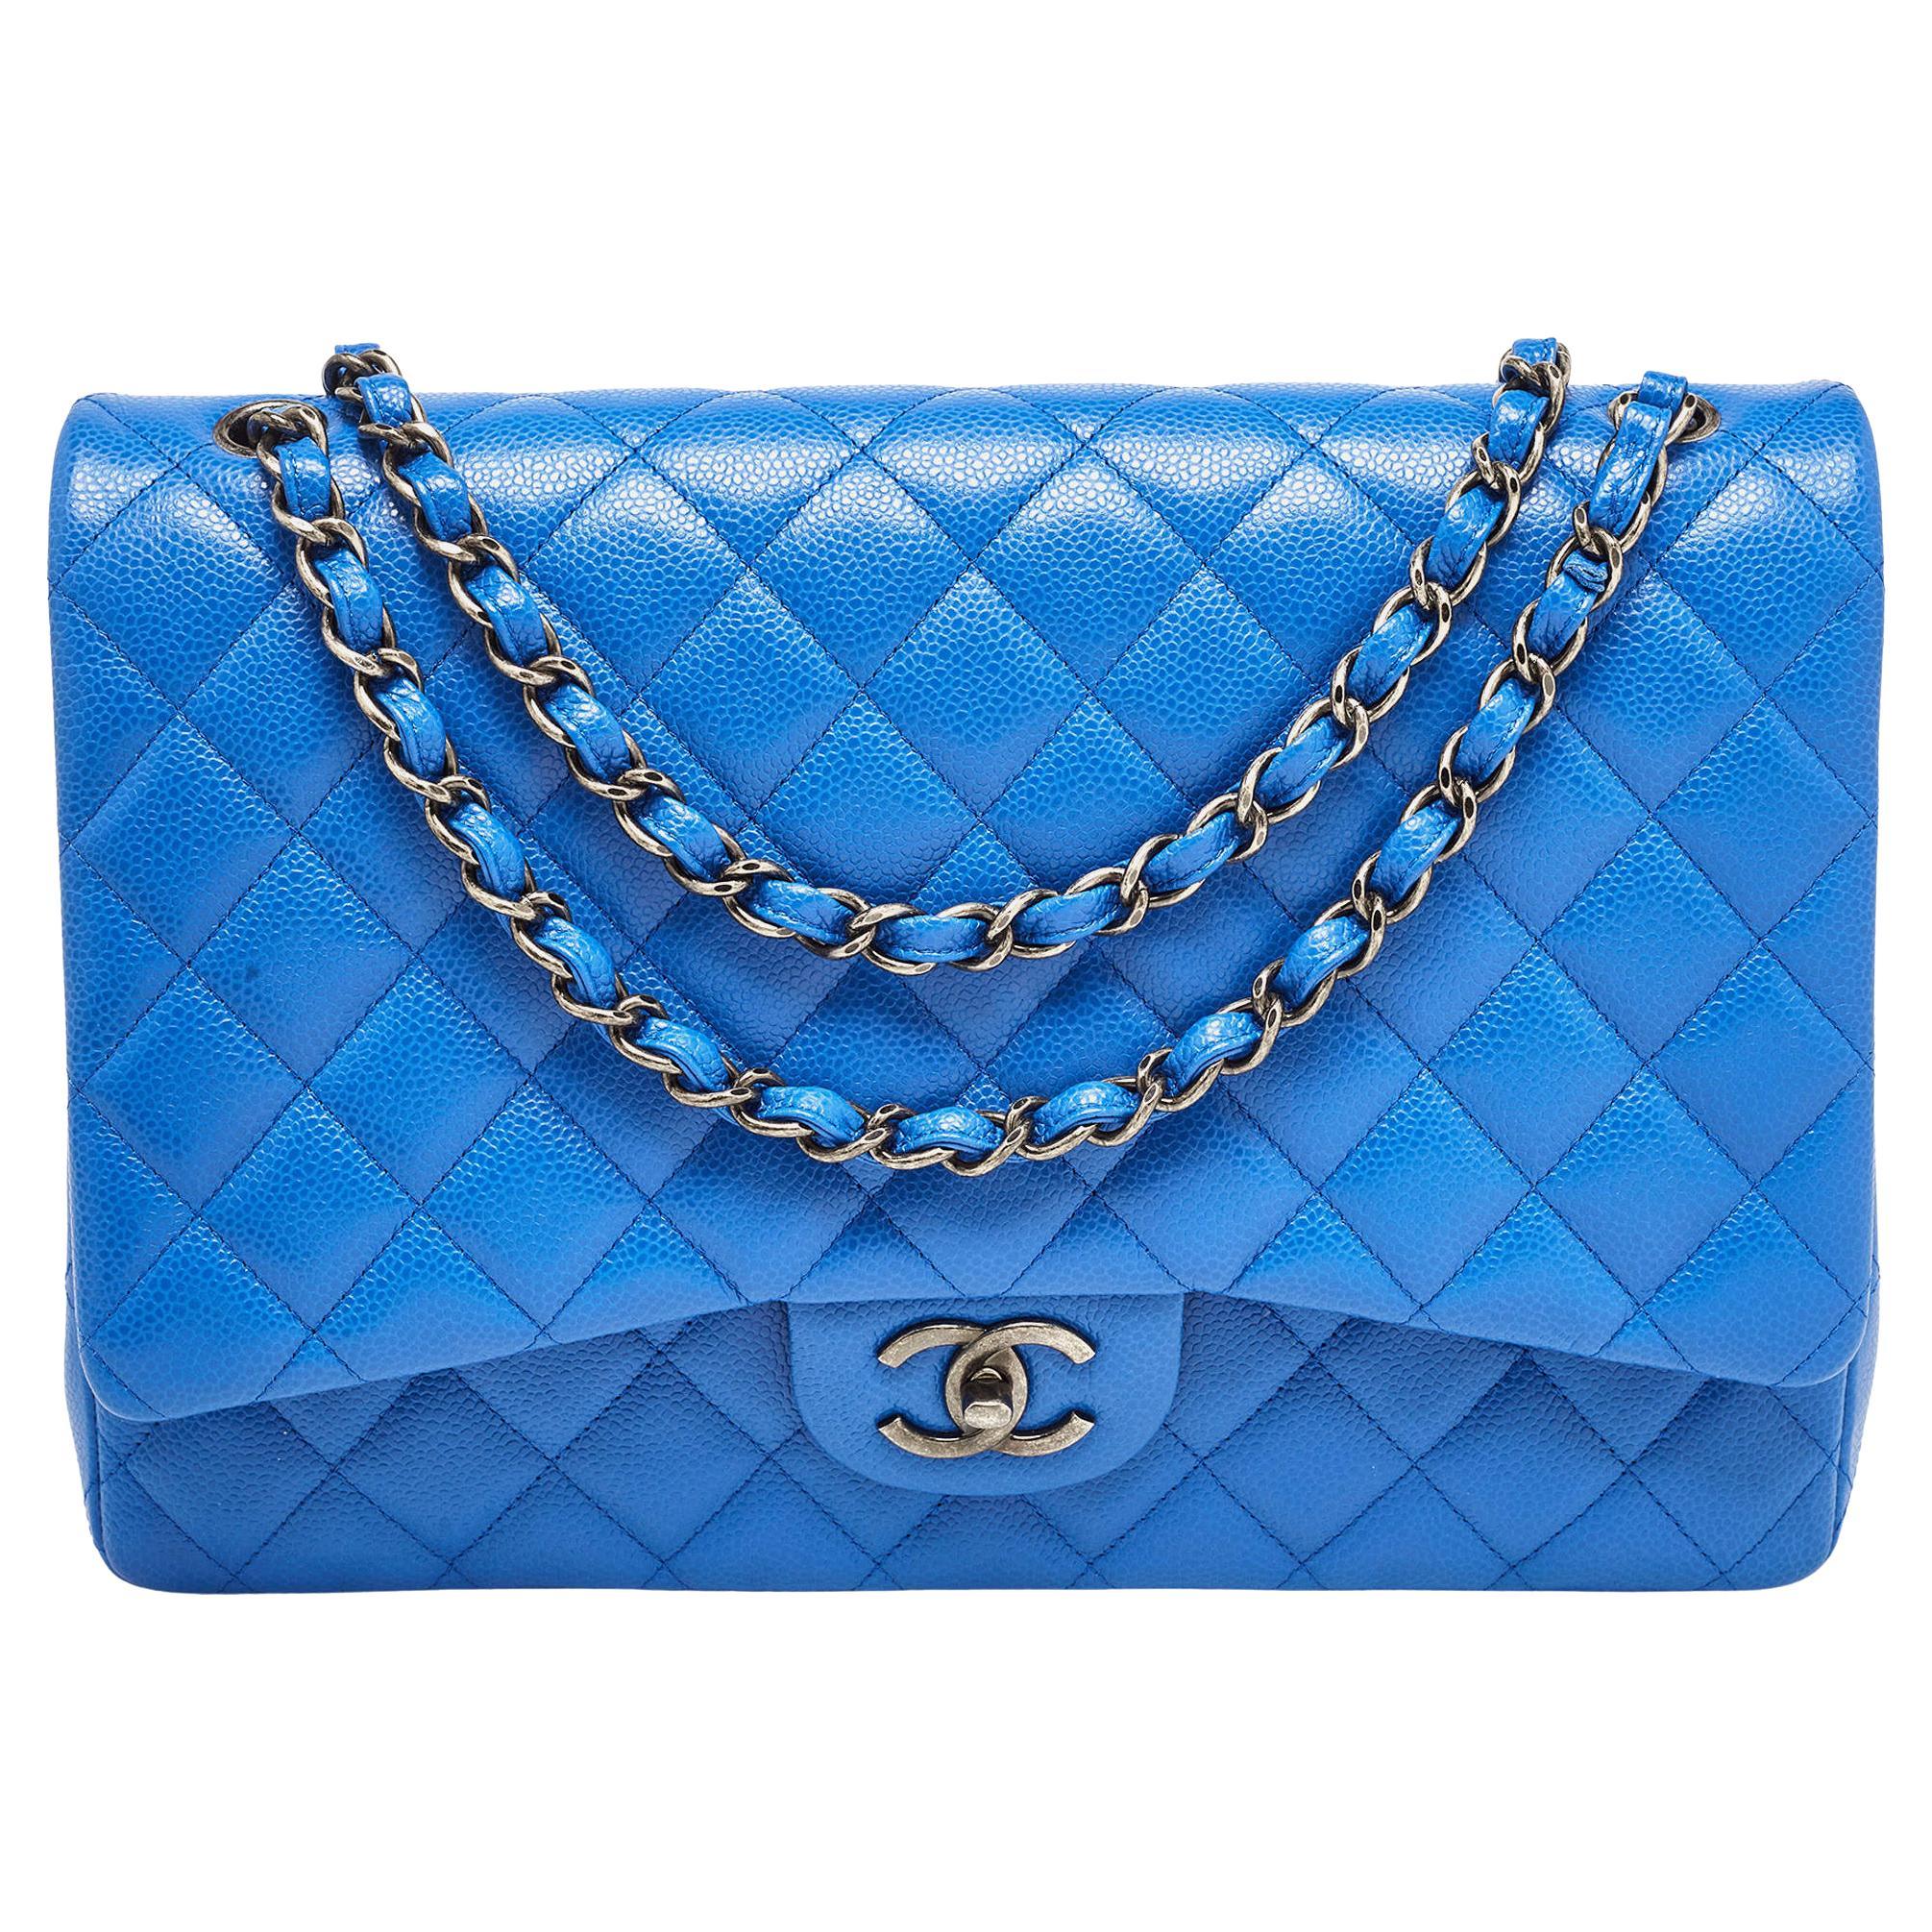 Chanel Blue Quilted Caviar Leather Maxi Classic Double Flap Bag